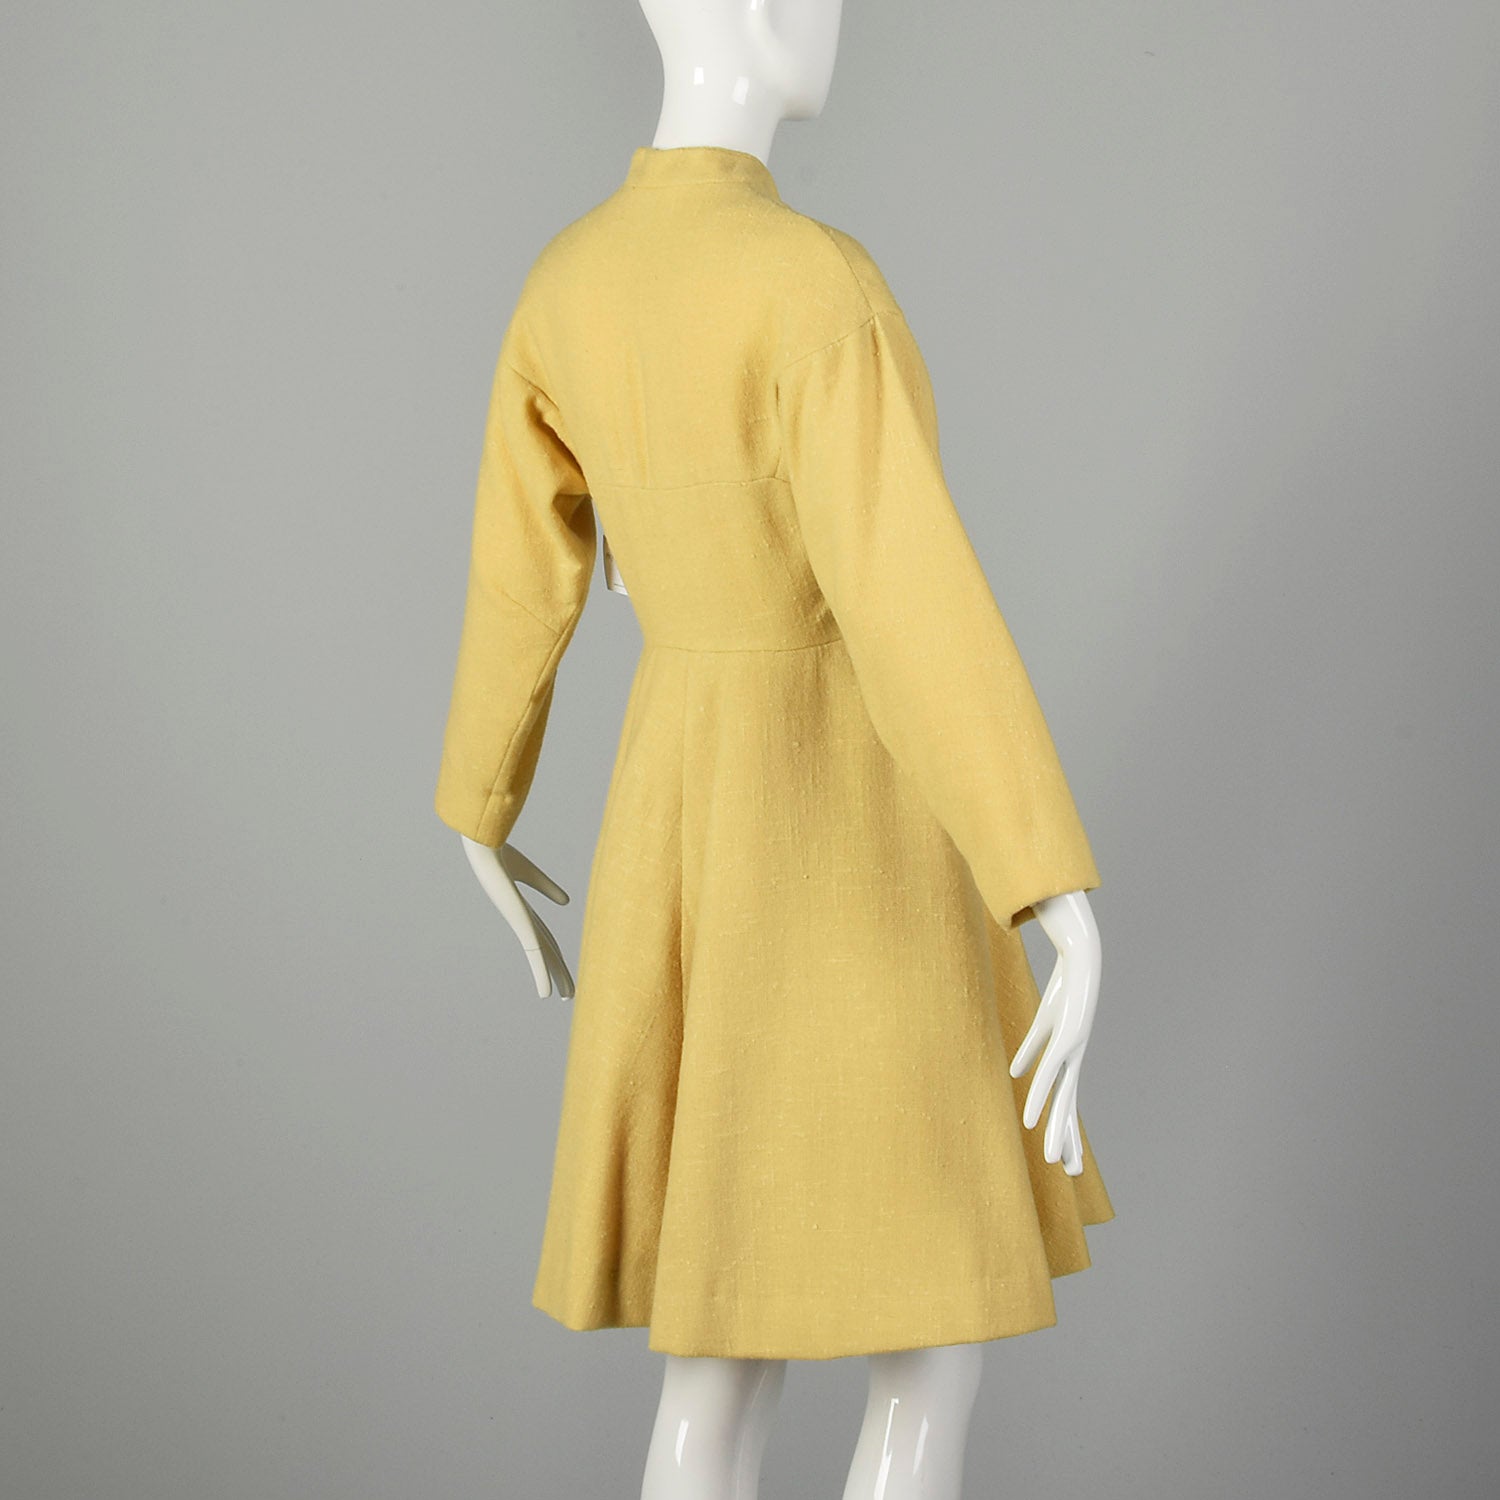 Small 1950s Princess Coat Yellow Wool Spring Jacket Rockabilly Pin Up Outerwear